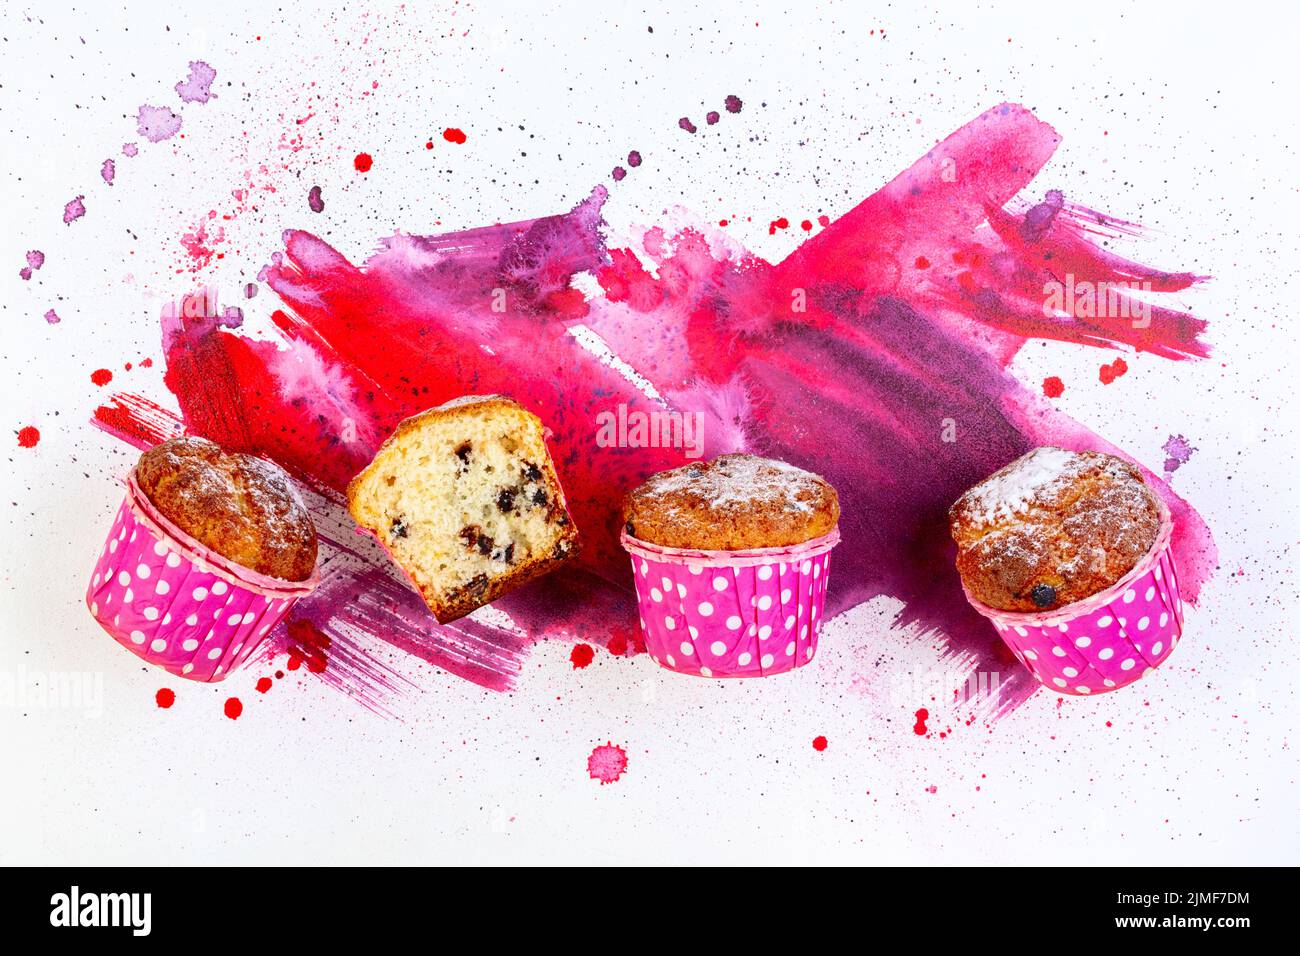 Muffins with pieces of chocolate. Stock Photo